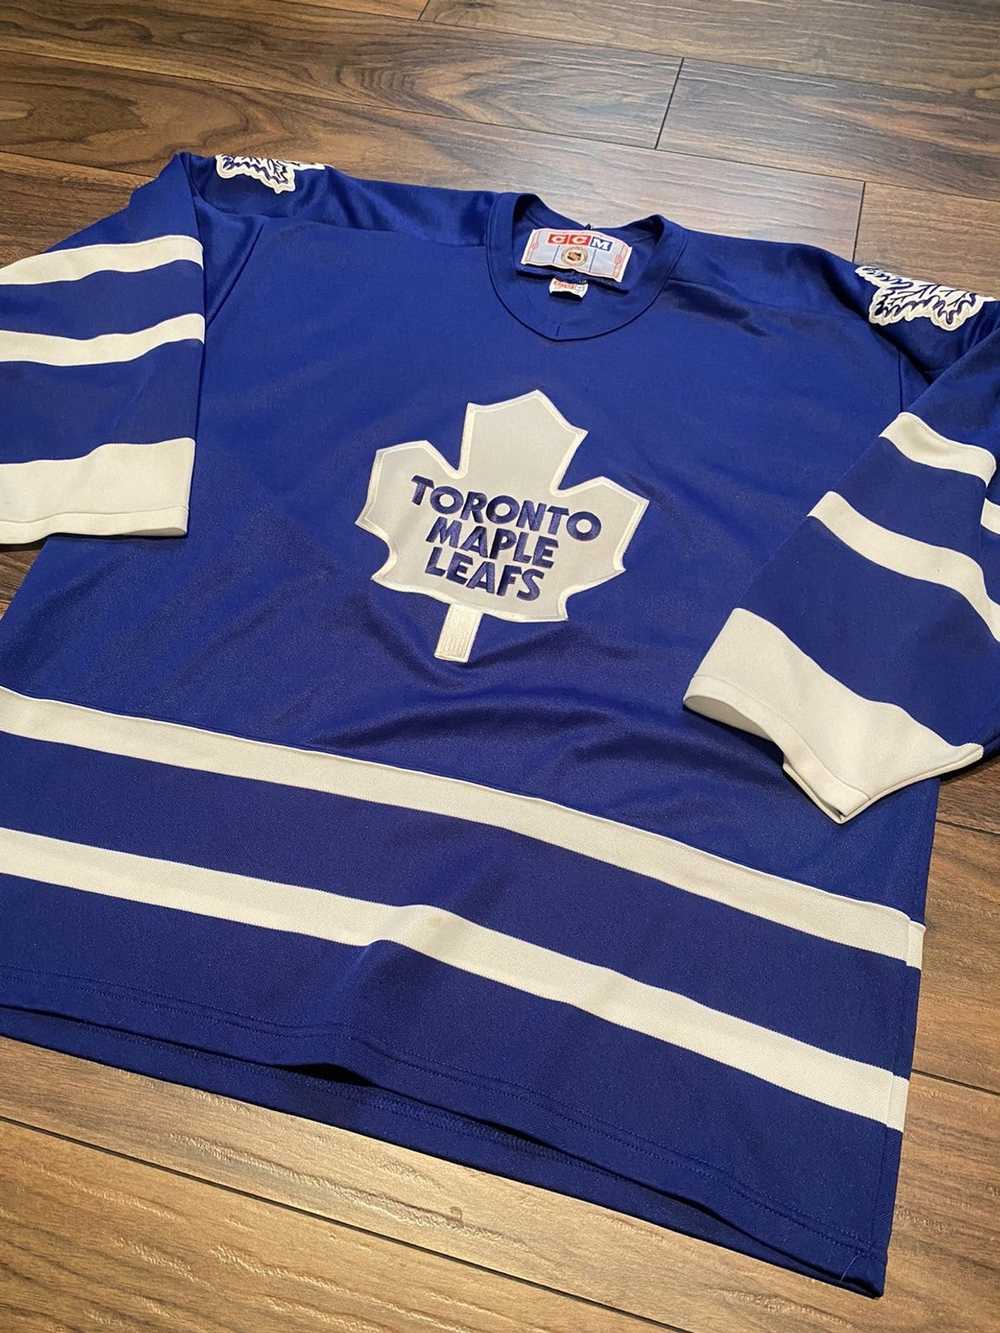 EUC MENS NHL TORONTO MAPLE LEAFS JERSEY SM/MED OFFICIAL LICENSED PRODUCT